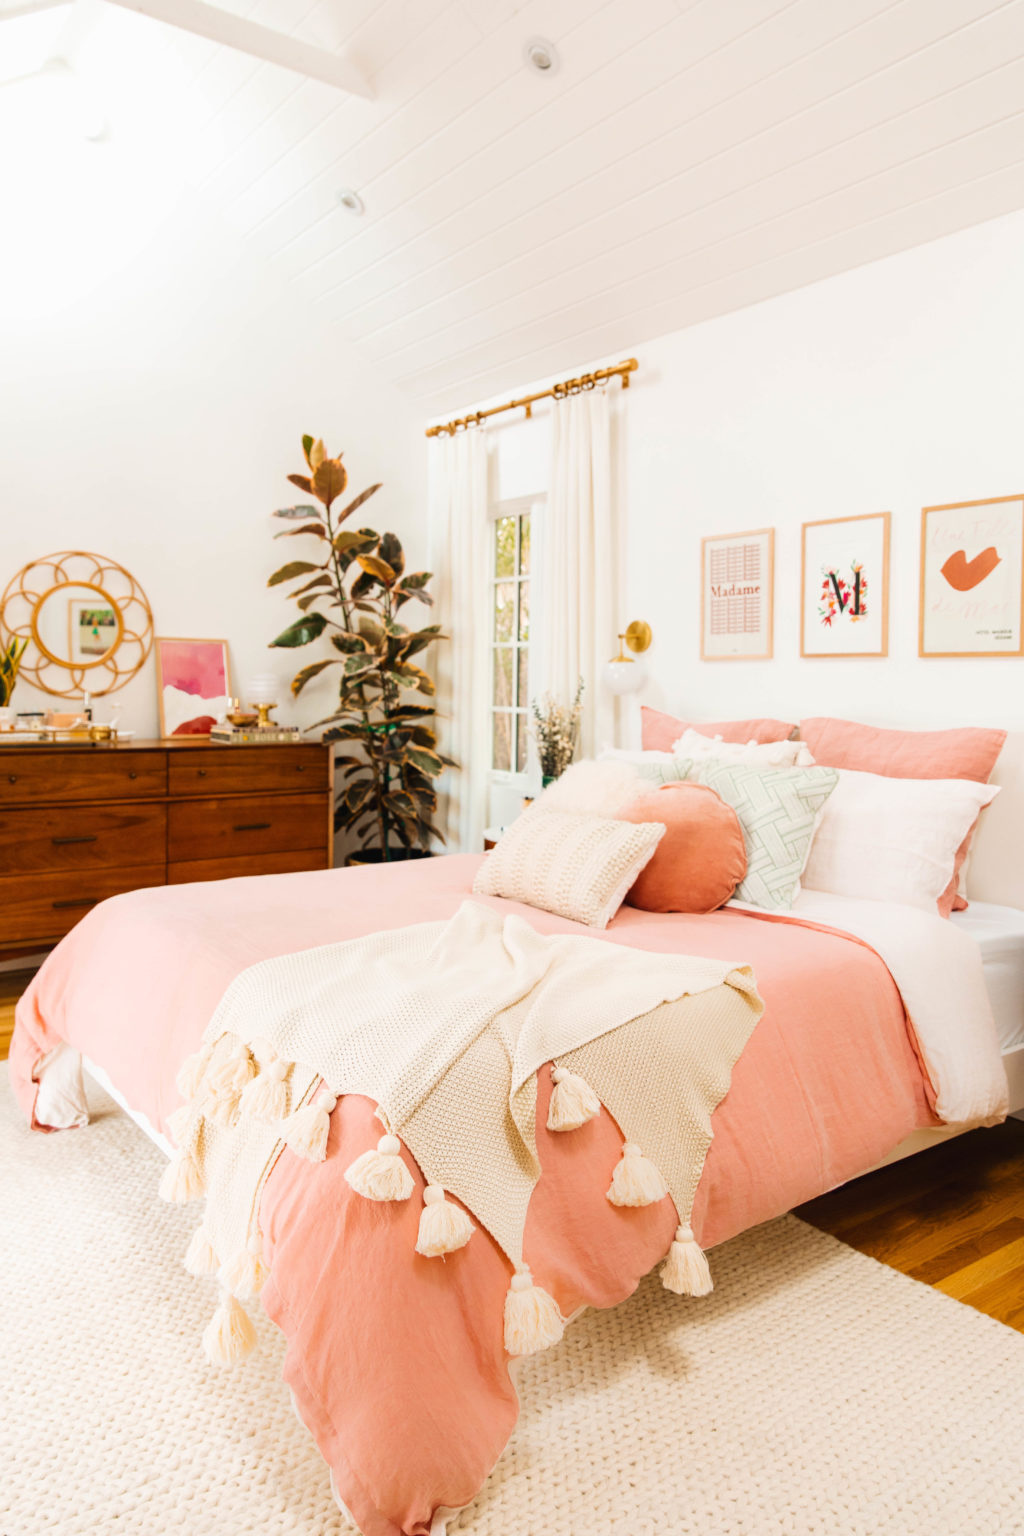 Our Blush Master Bedroom Reveal - New Darlings